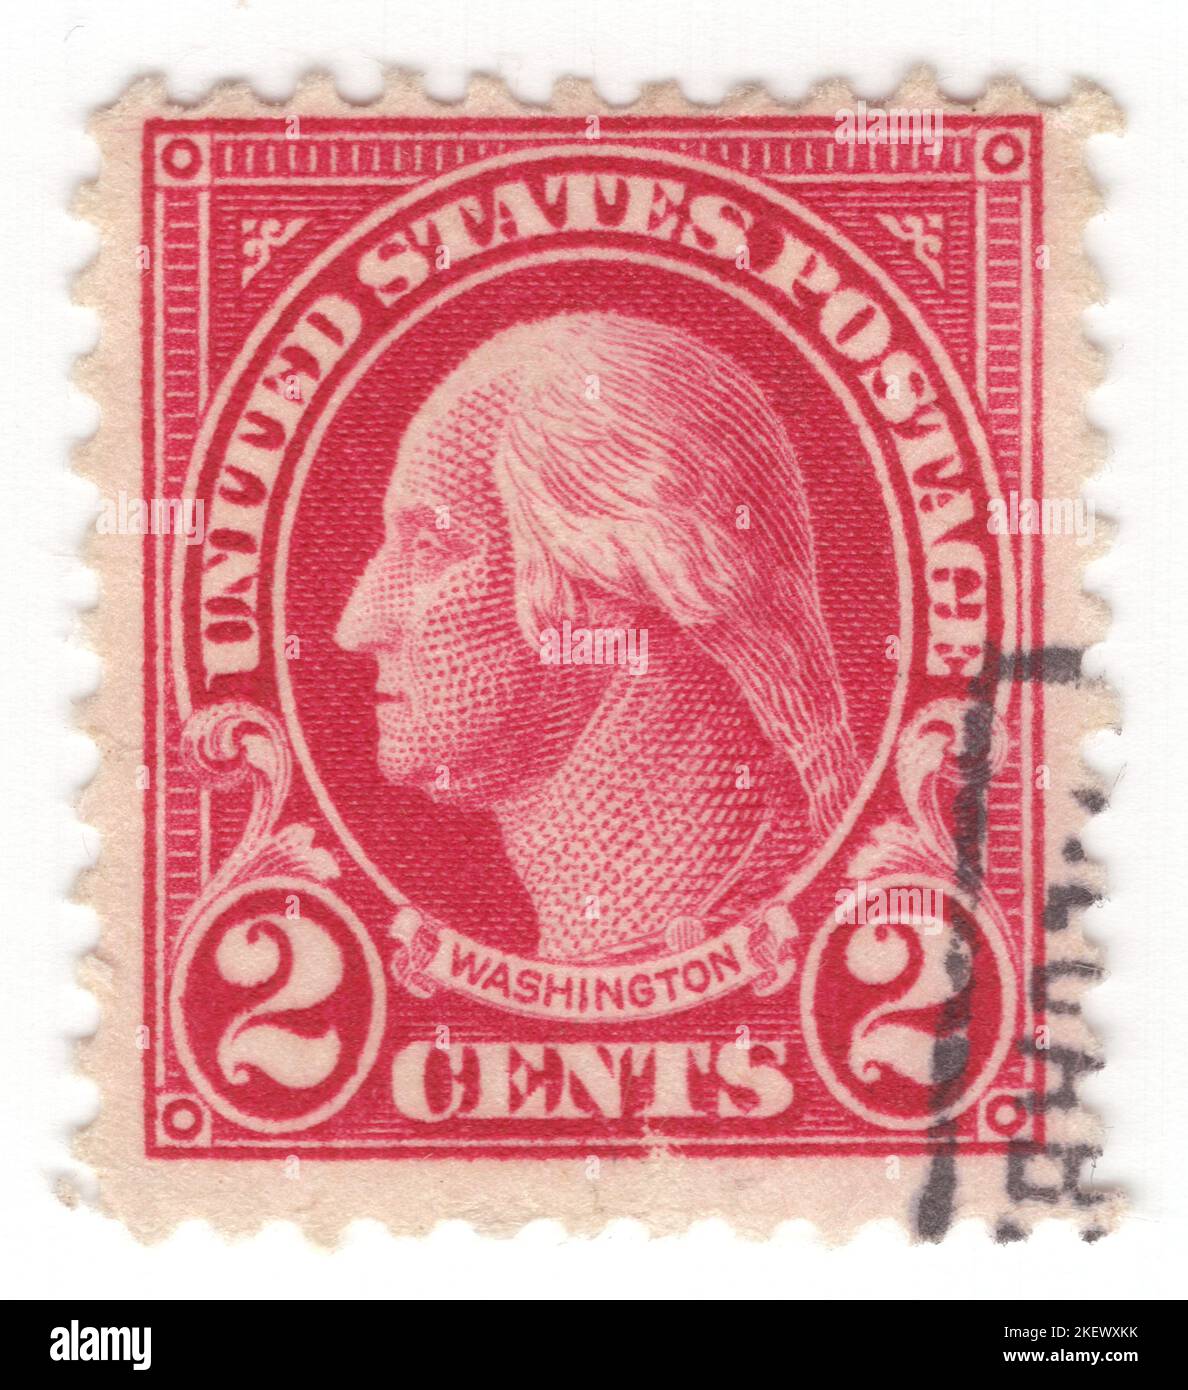 USA - 1923: An 2 cents carmine postage stamp depicting portrait of George Washington. American military officer, statesman, and Founding Father who served as the first president of the United States from 1789 to 1797. Appointed by the Continental Congress as commander of the Continental Army, Washington led the Patriot forces to victory in the American Revolutionary War and served as the president of the Constitutional Convention of 1787, which created the Constitution of the United States and the American federal government. Washington has been called the 'Father of his Country' Stock Photo